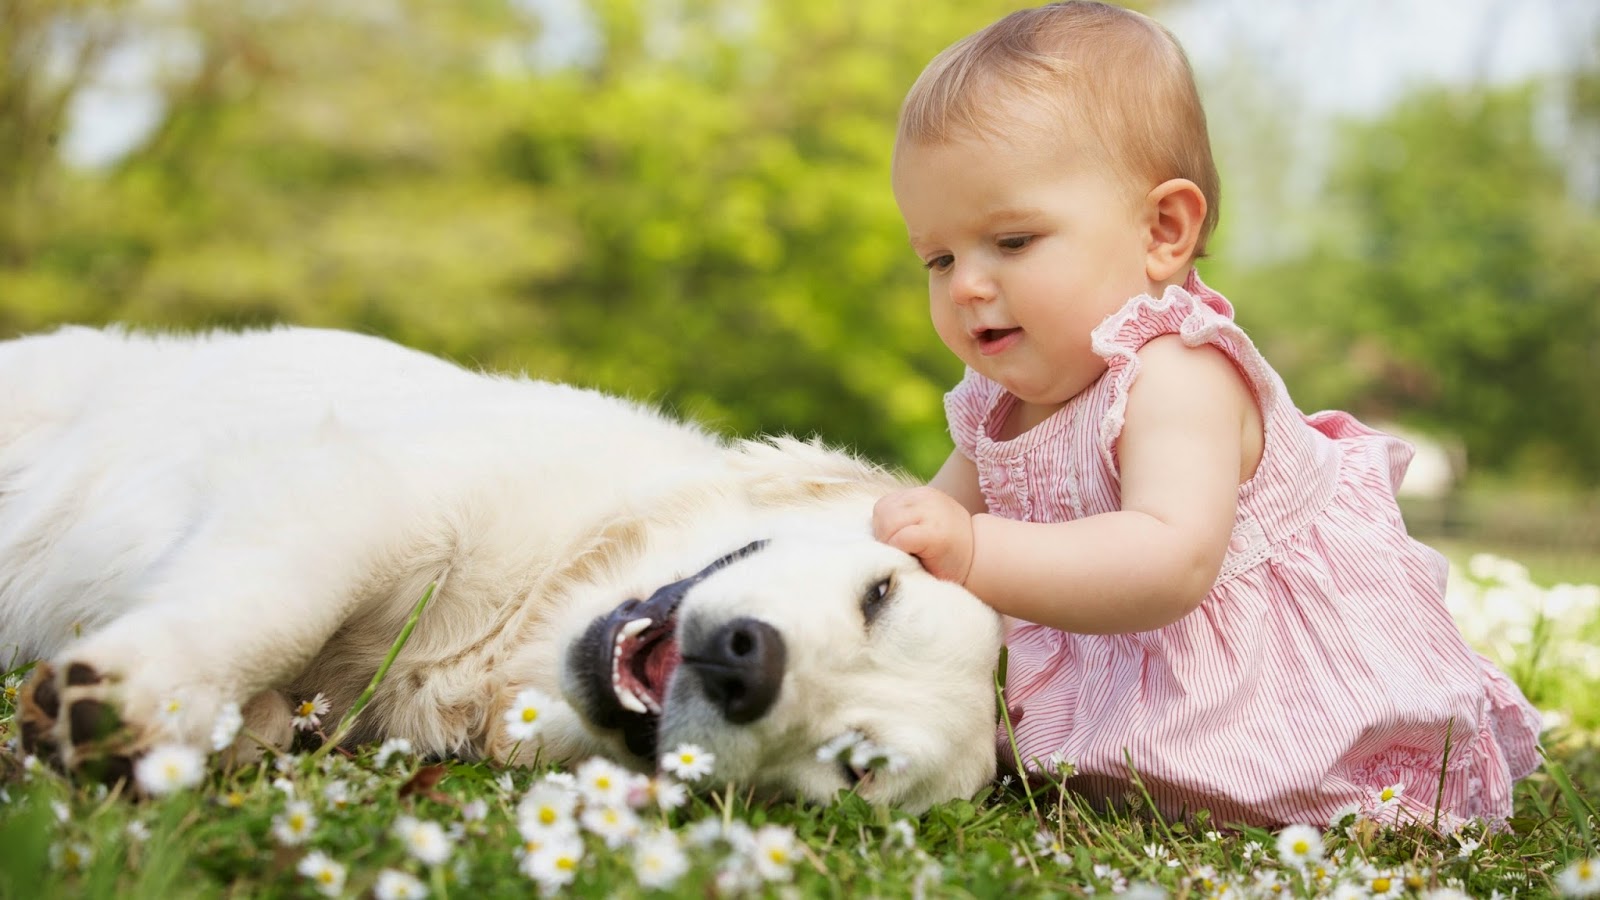 Toddler Wallpaper - Children Playing With Dogs - HD Wallpaper 